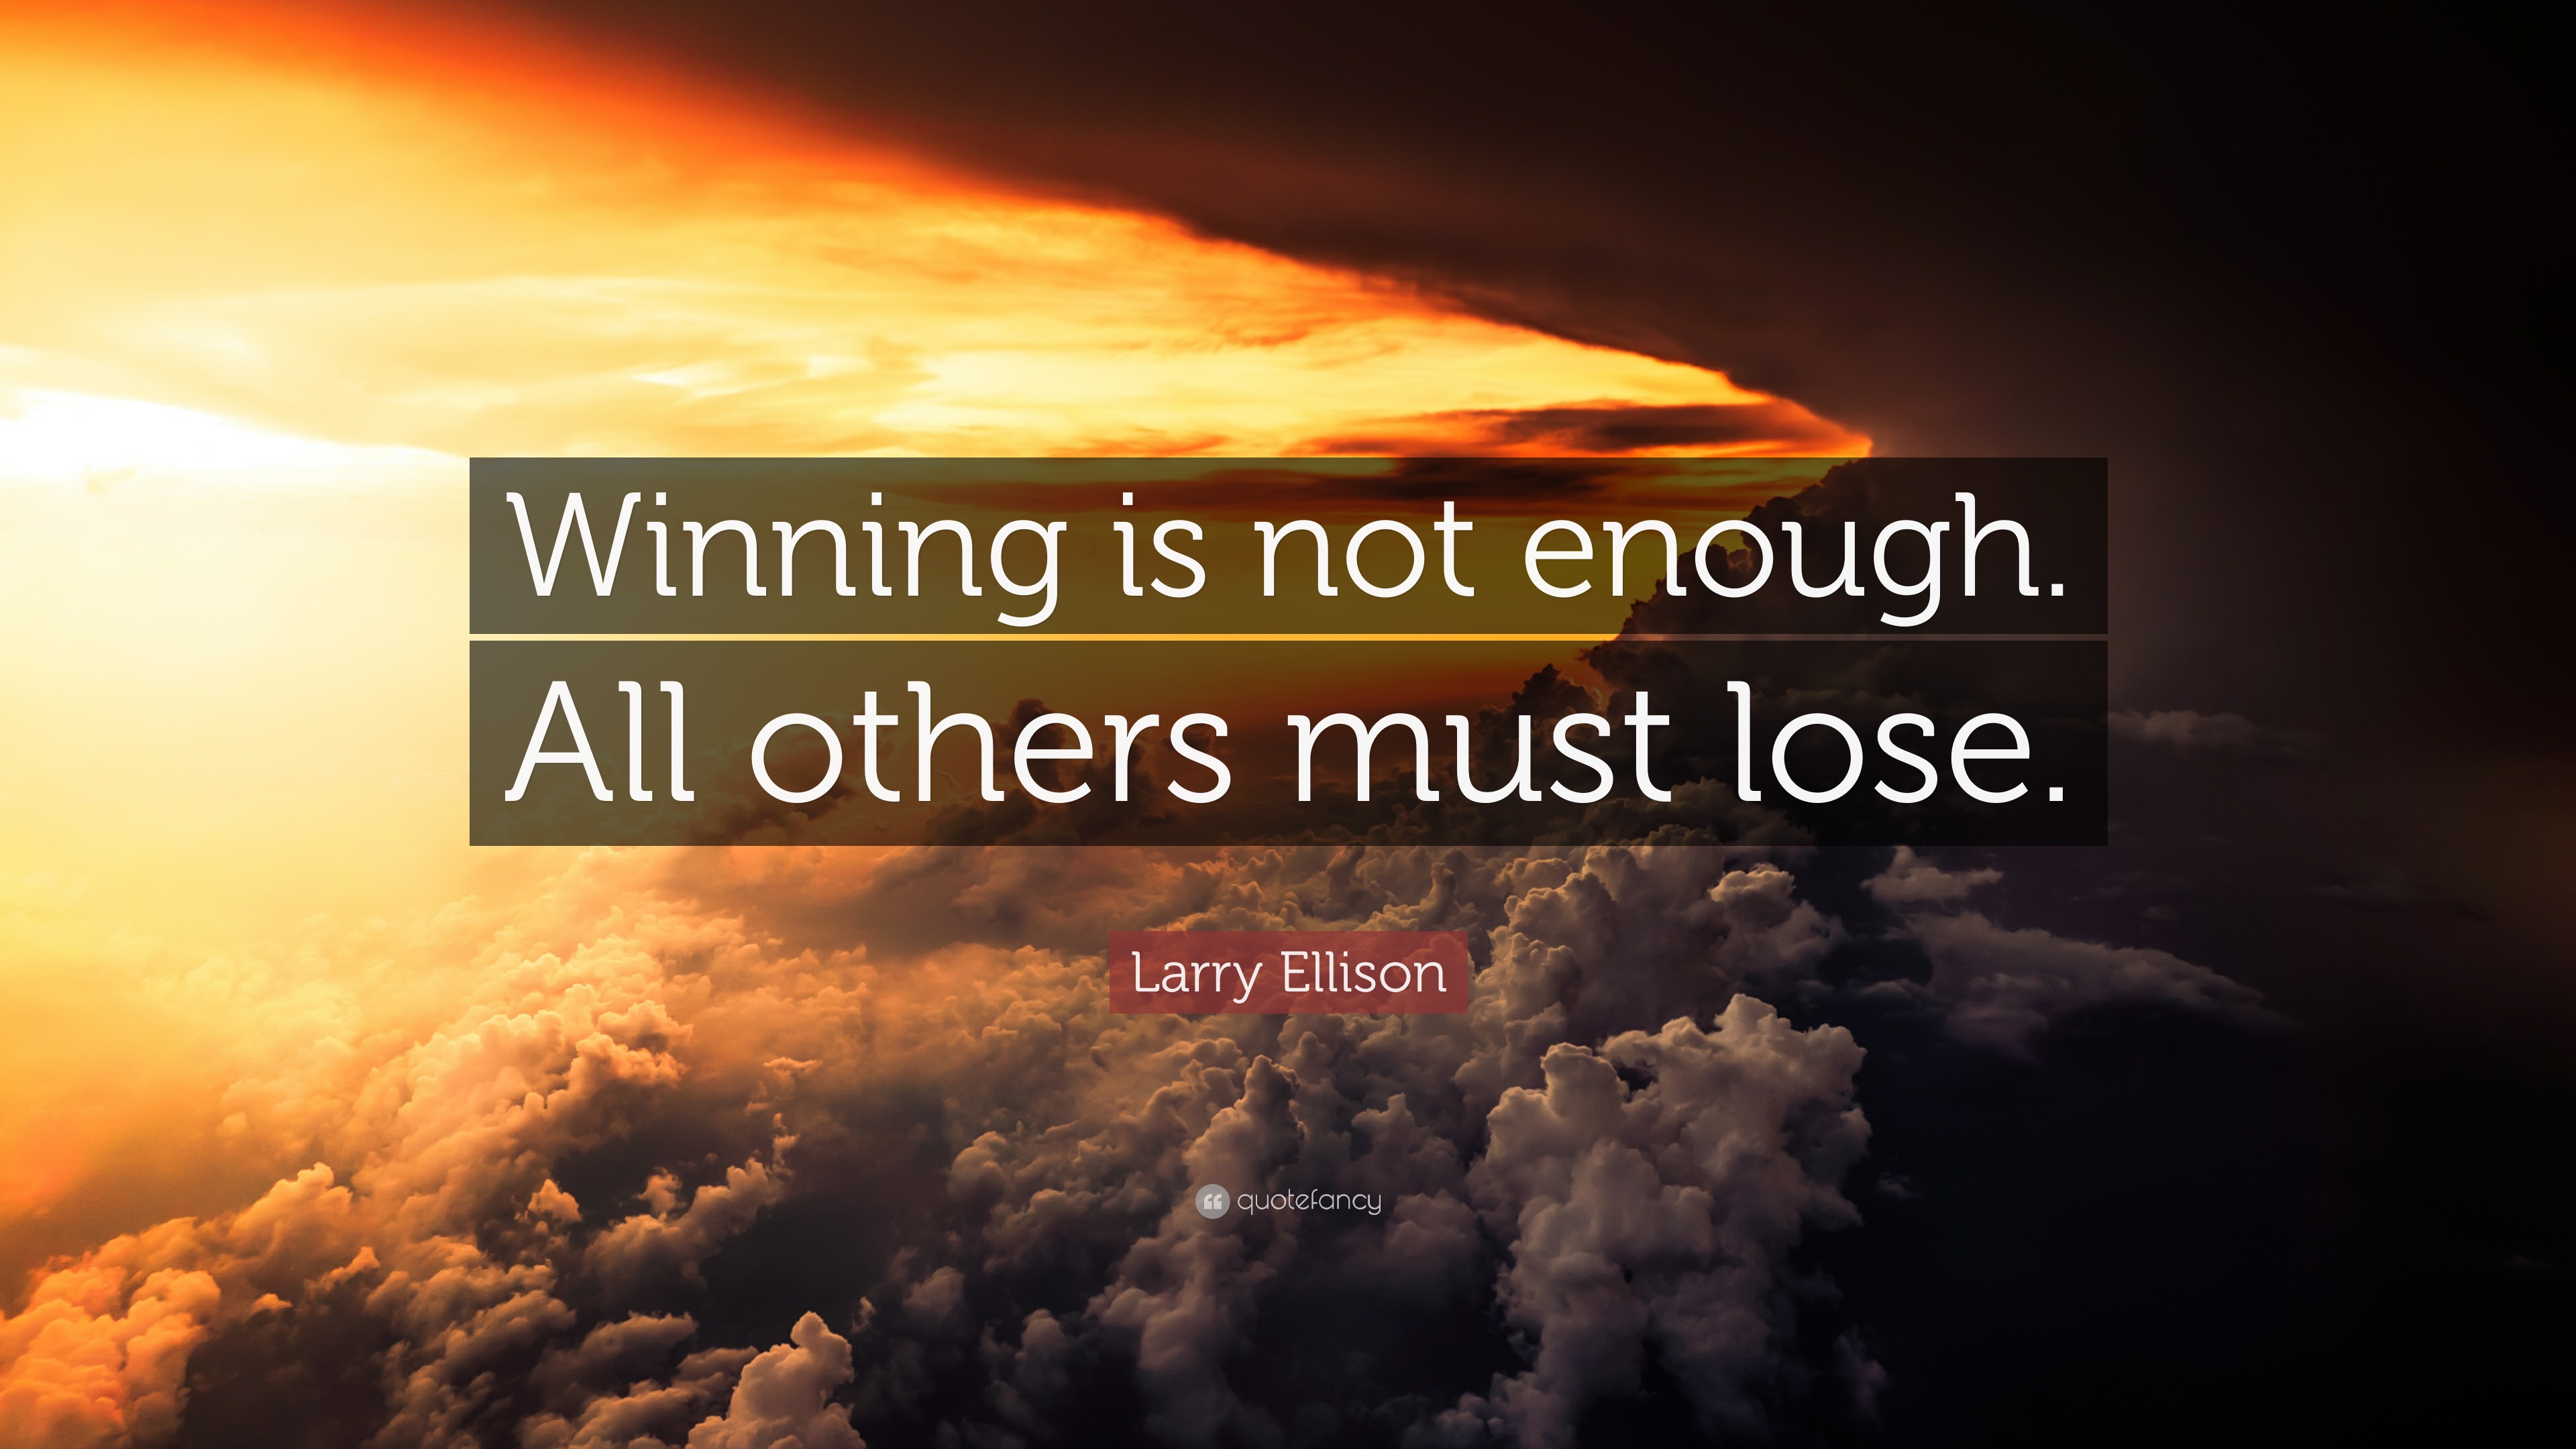 Larry Ellison Quote: “Winning is not enough. All others must lose